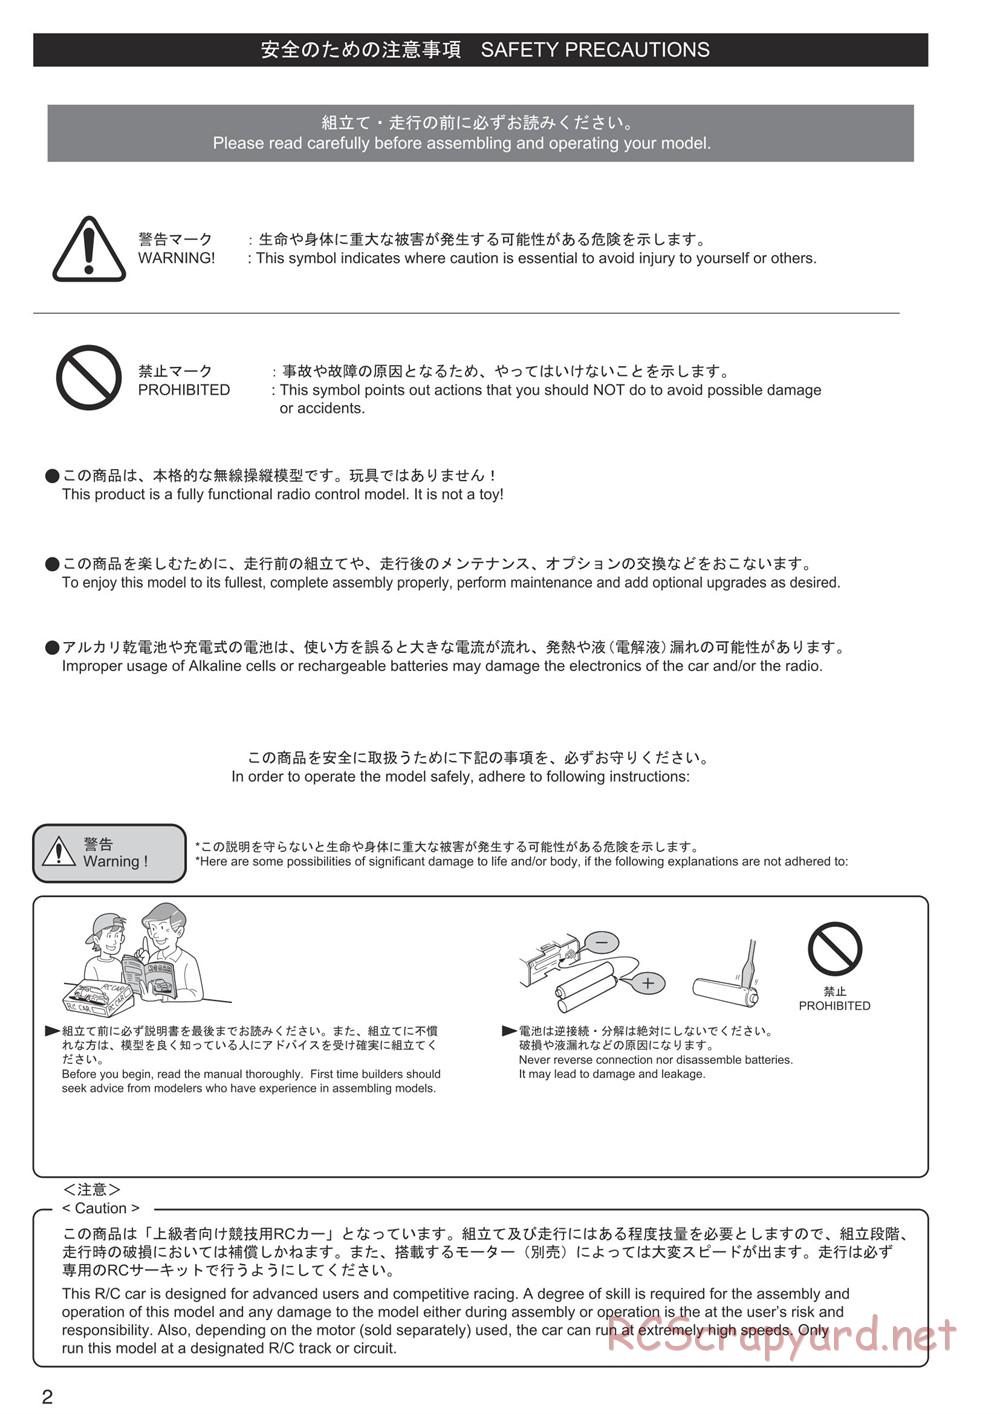 Kyosho - Ultima RB7SS - Manual - Page 2